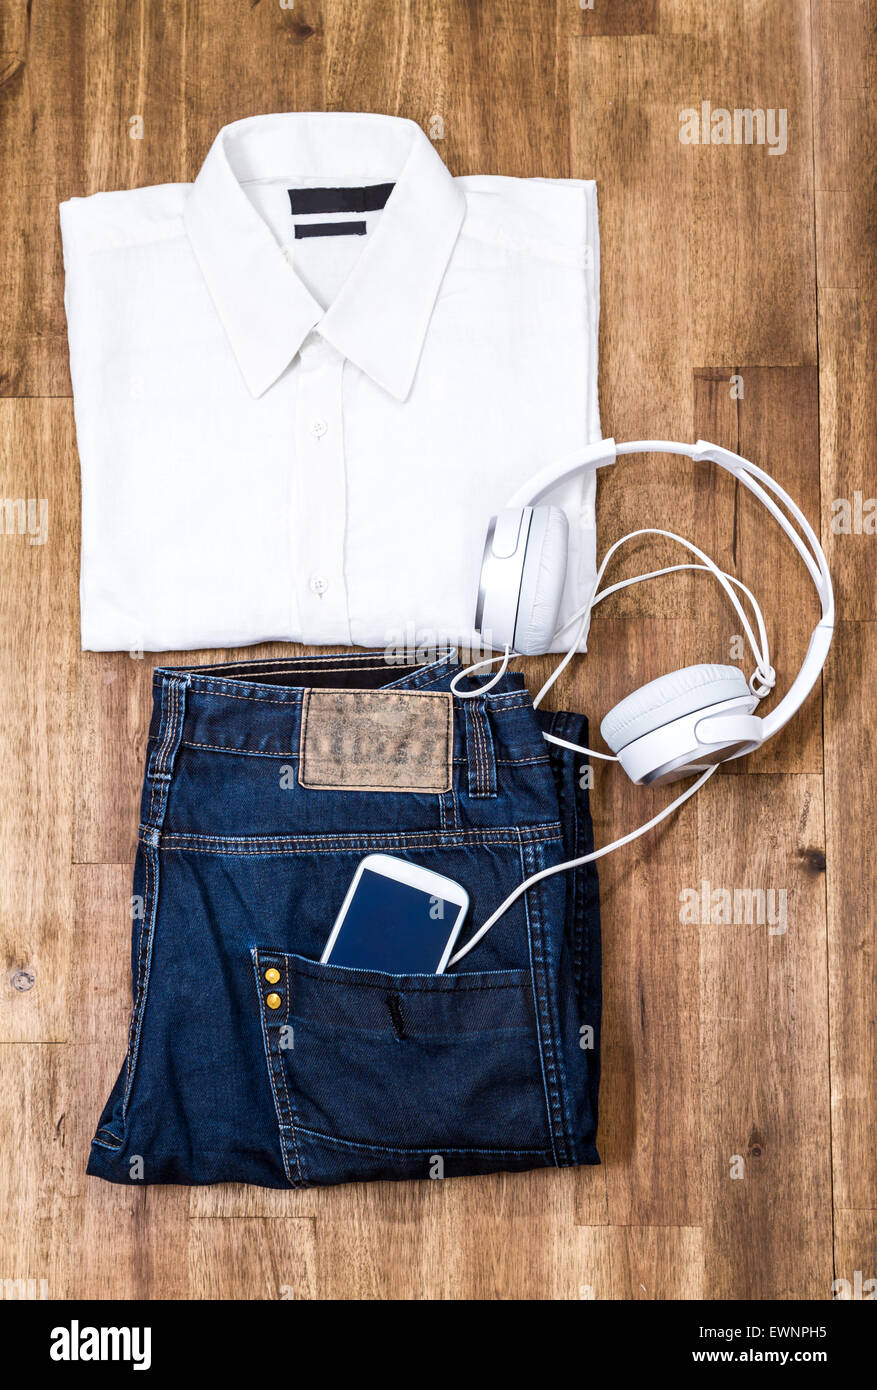 Informal male outfit with cellphone and headphone, background Stock Photo